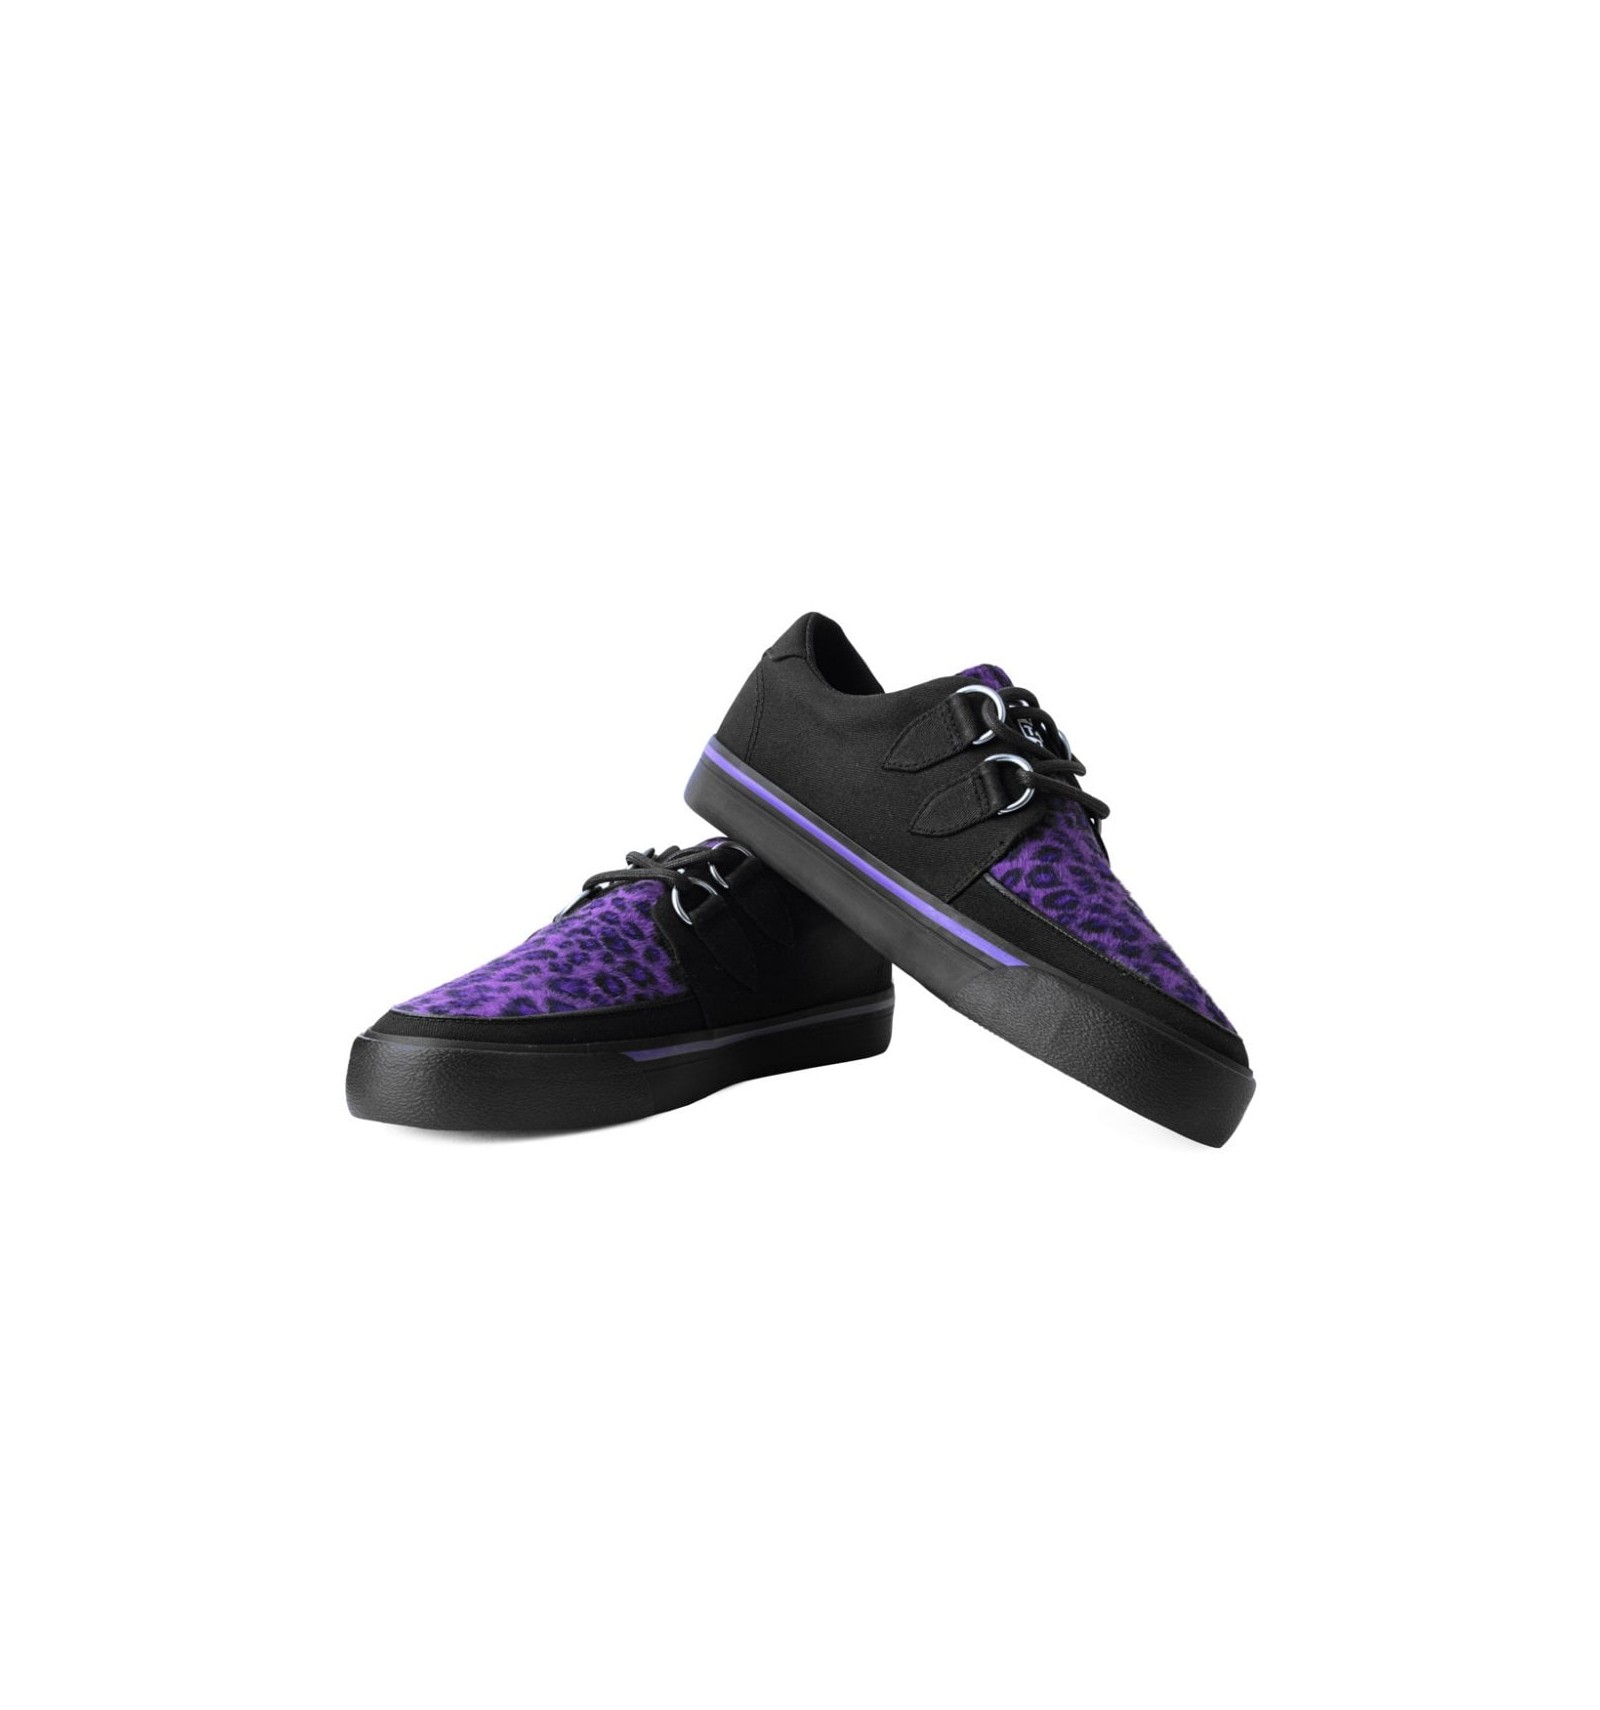 purple creepers shoes